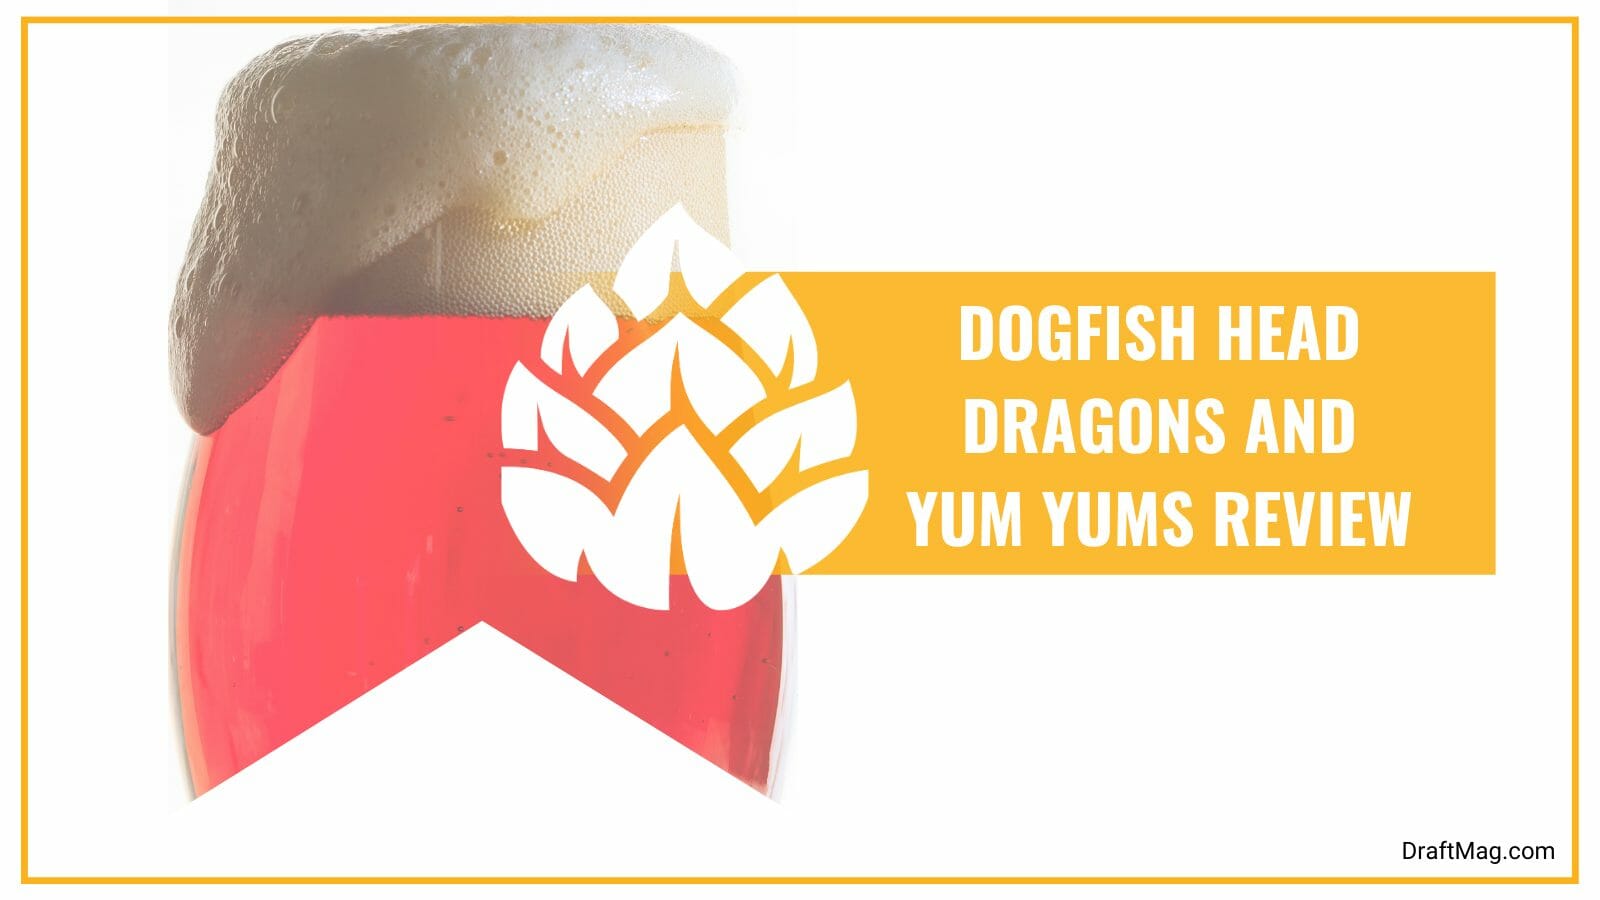 Dogfish head dragons guide